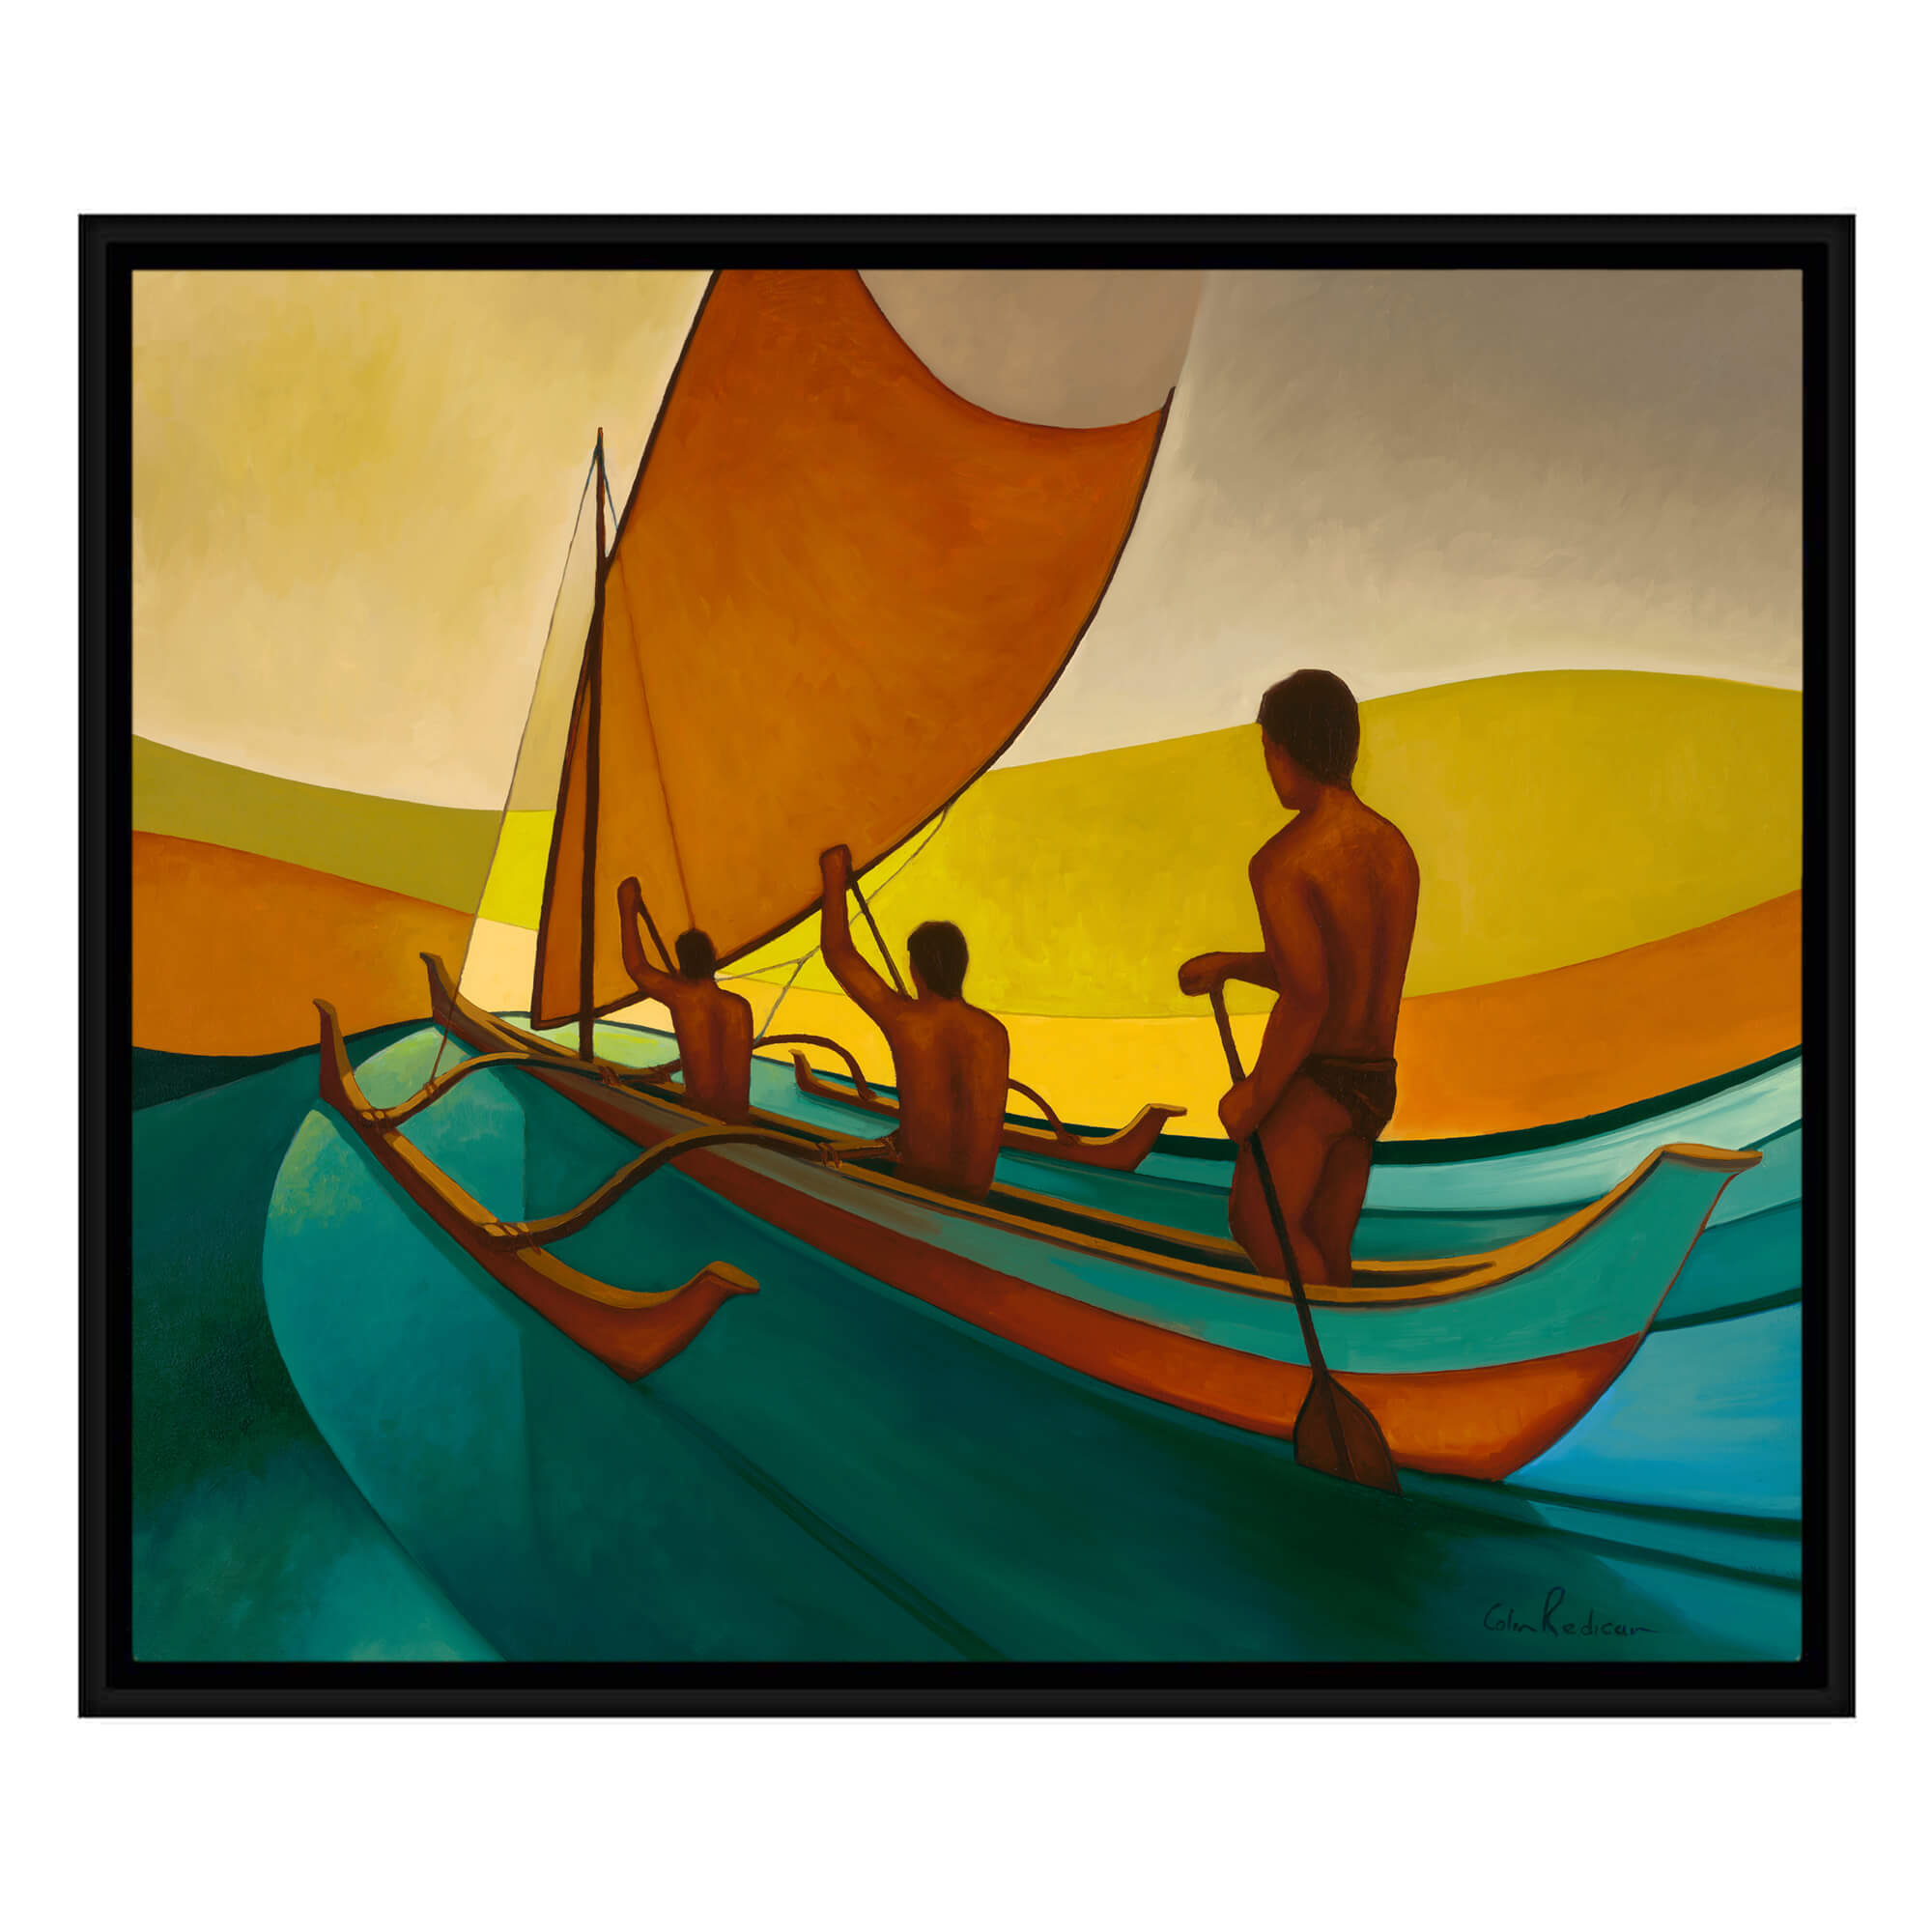 Locals in a canoe by Hawaii artist Colin Redican